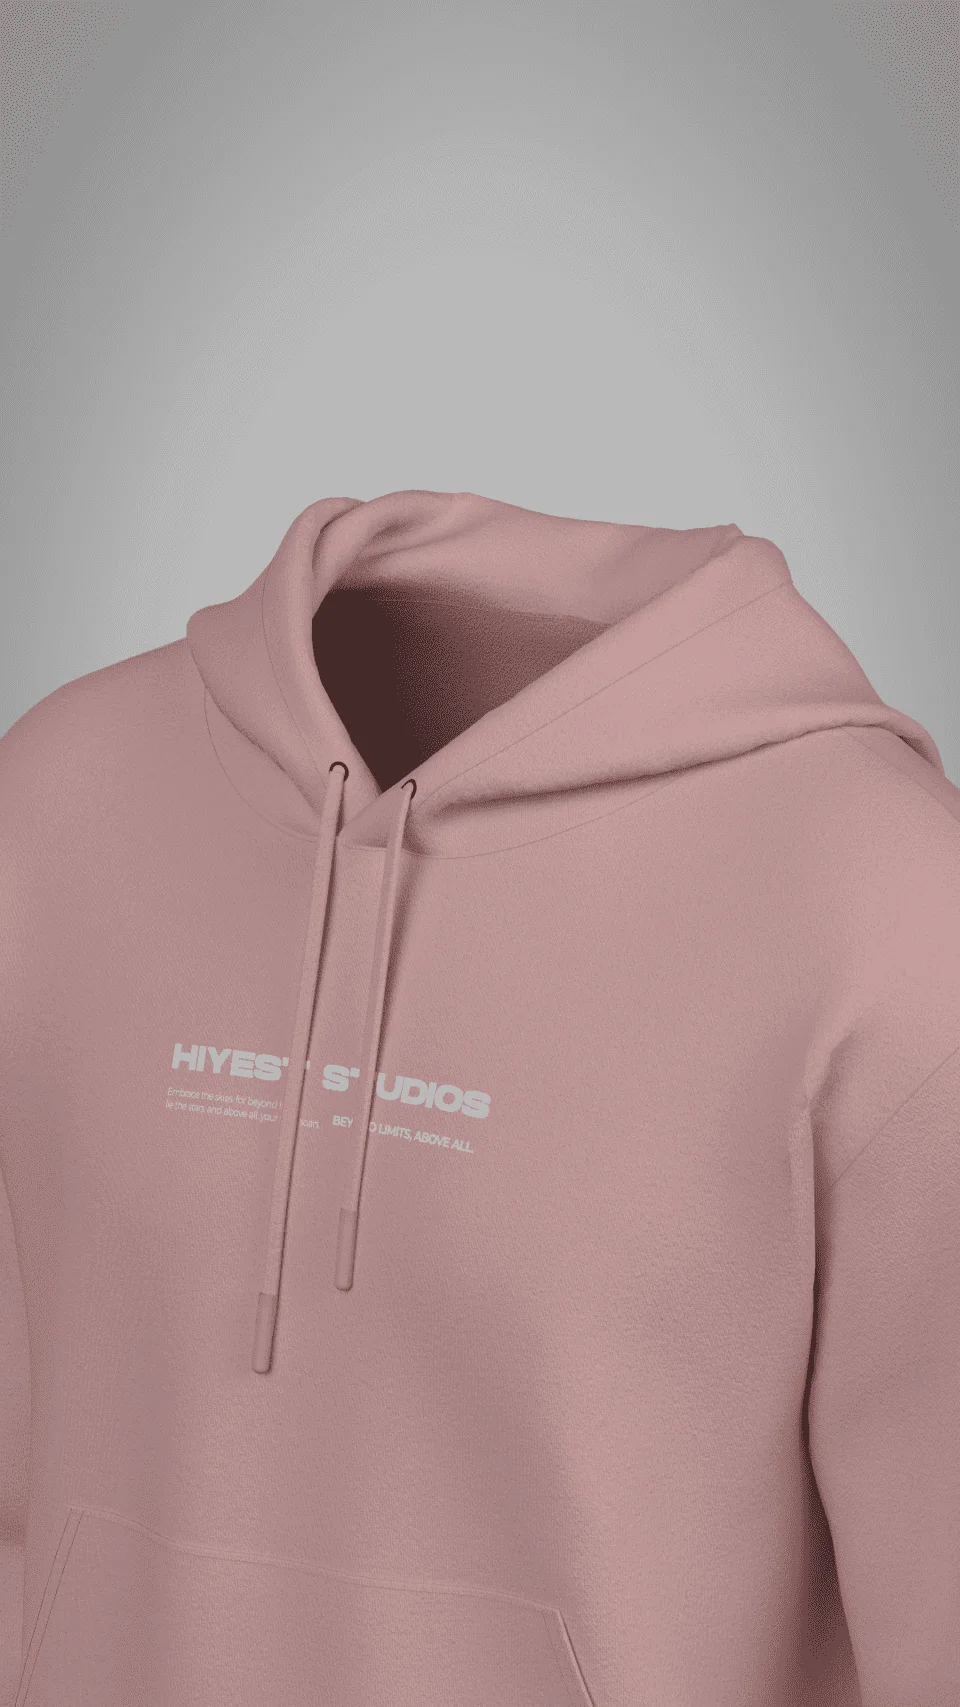 affordable solid pink category: hiyest studios, category store near me, best pink category  online, pink category, buy pink oversized hoodie on sale, pink pink category, category for men & women